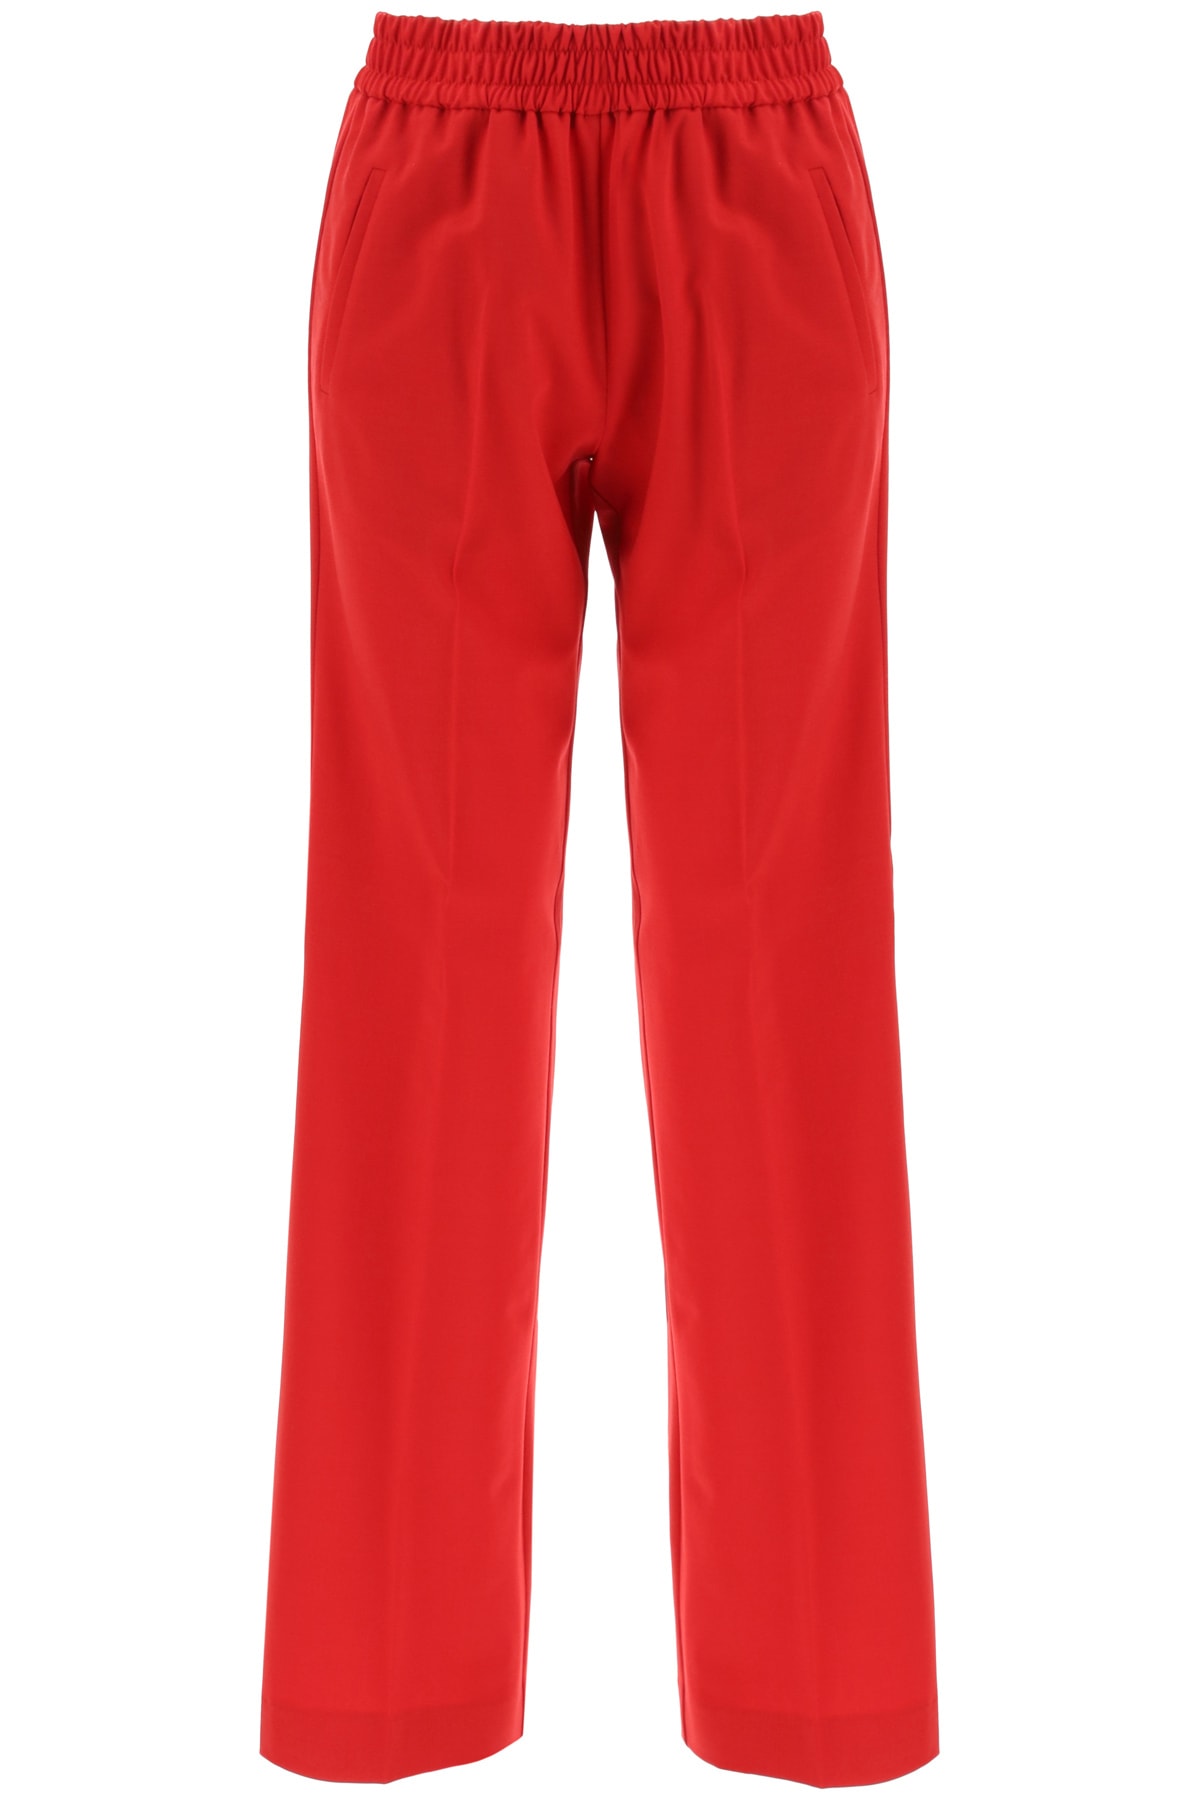 Golden Goose Brittany Sports Trousers